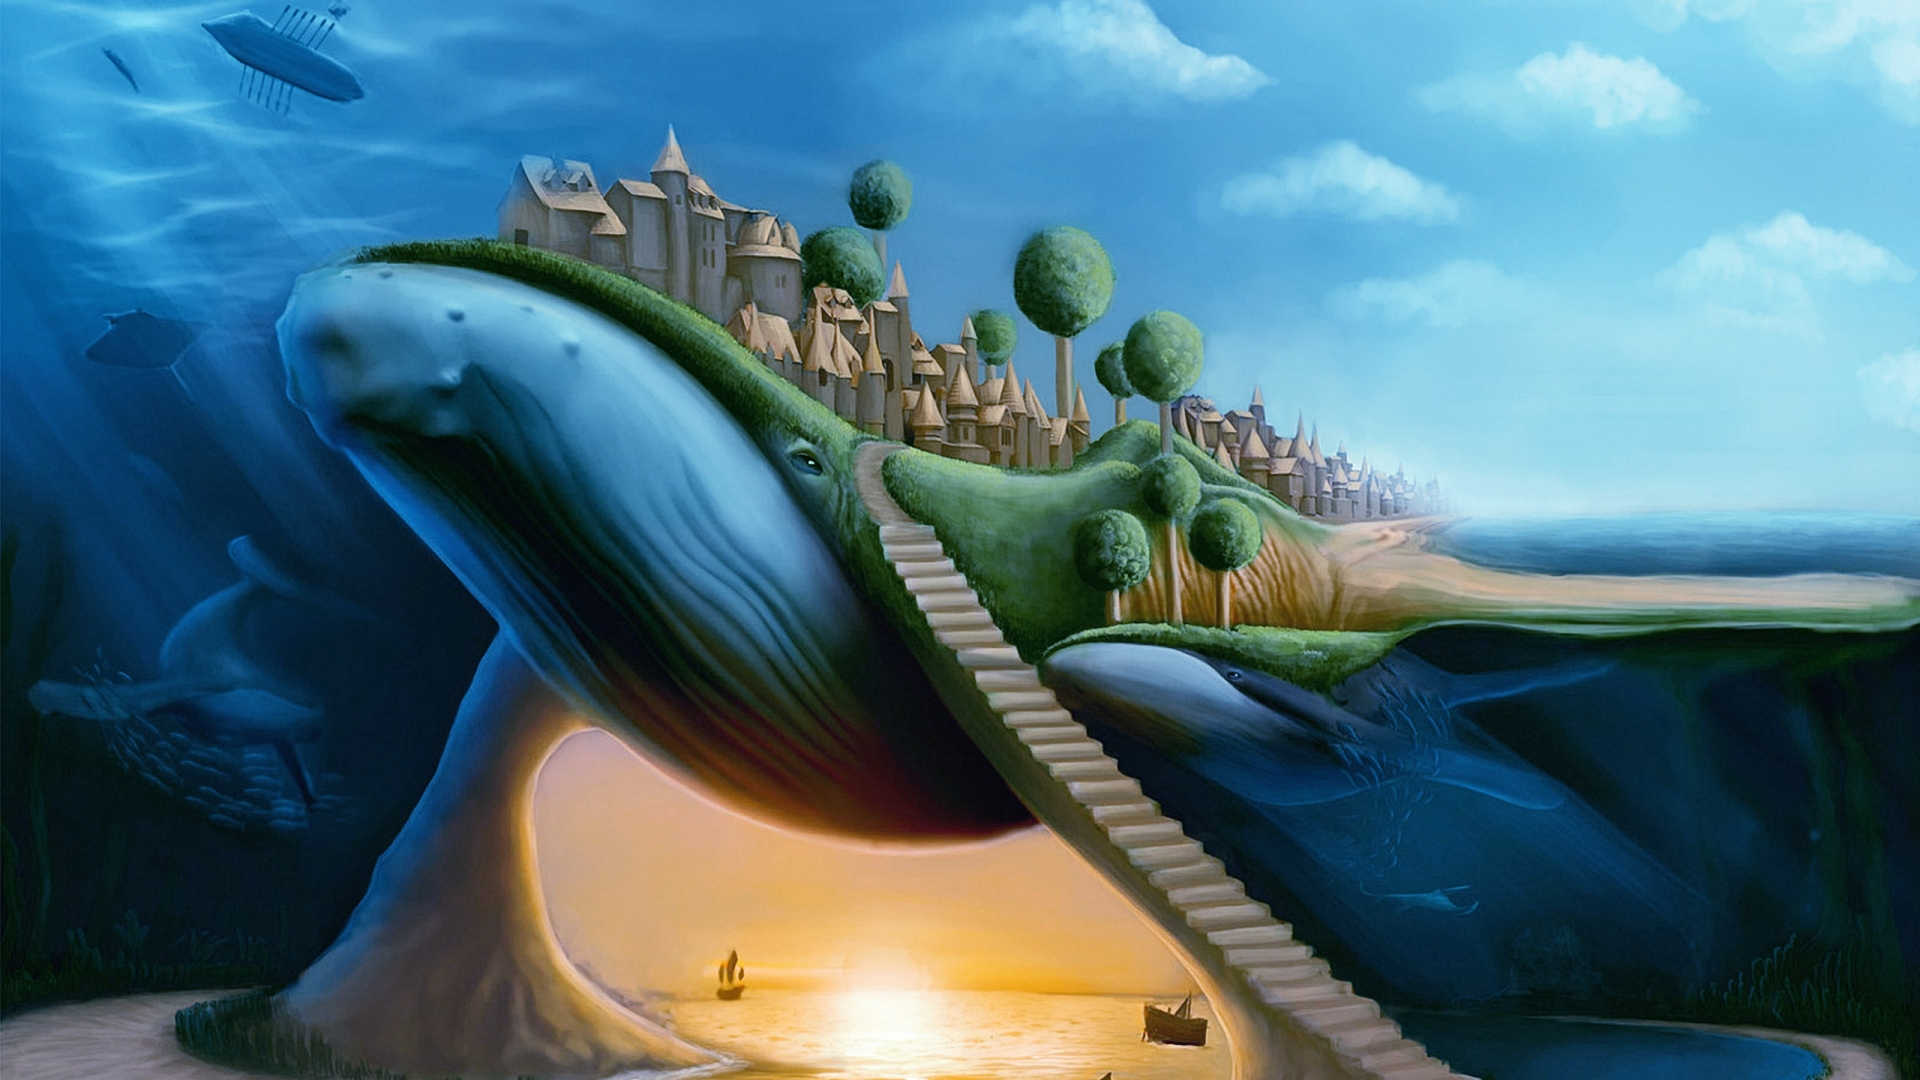 animals, Whales, Surreal, Dream, Fantasy, Whale, Cities, Travel, Ocean